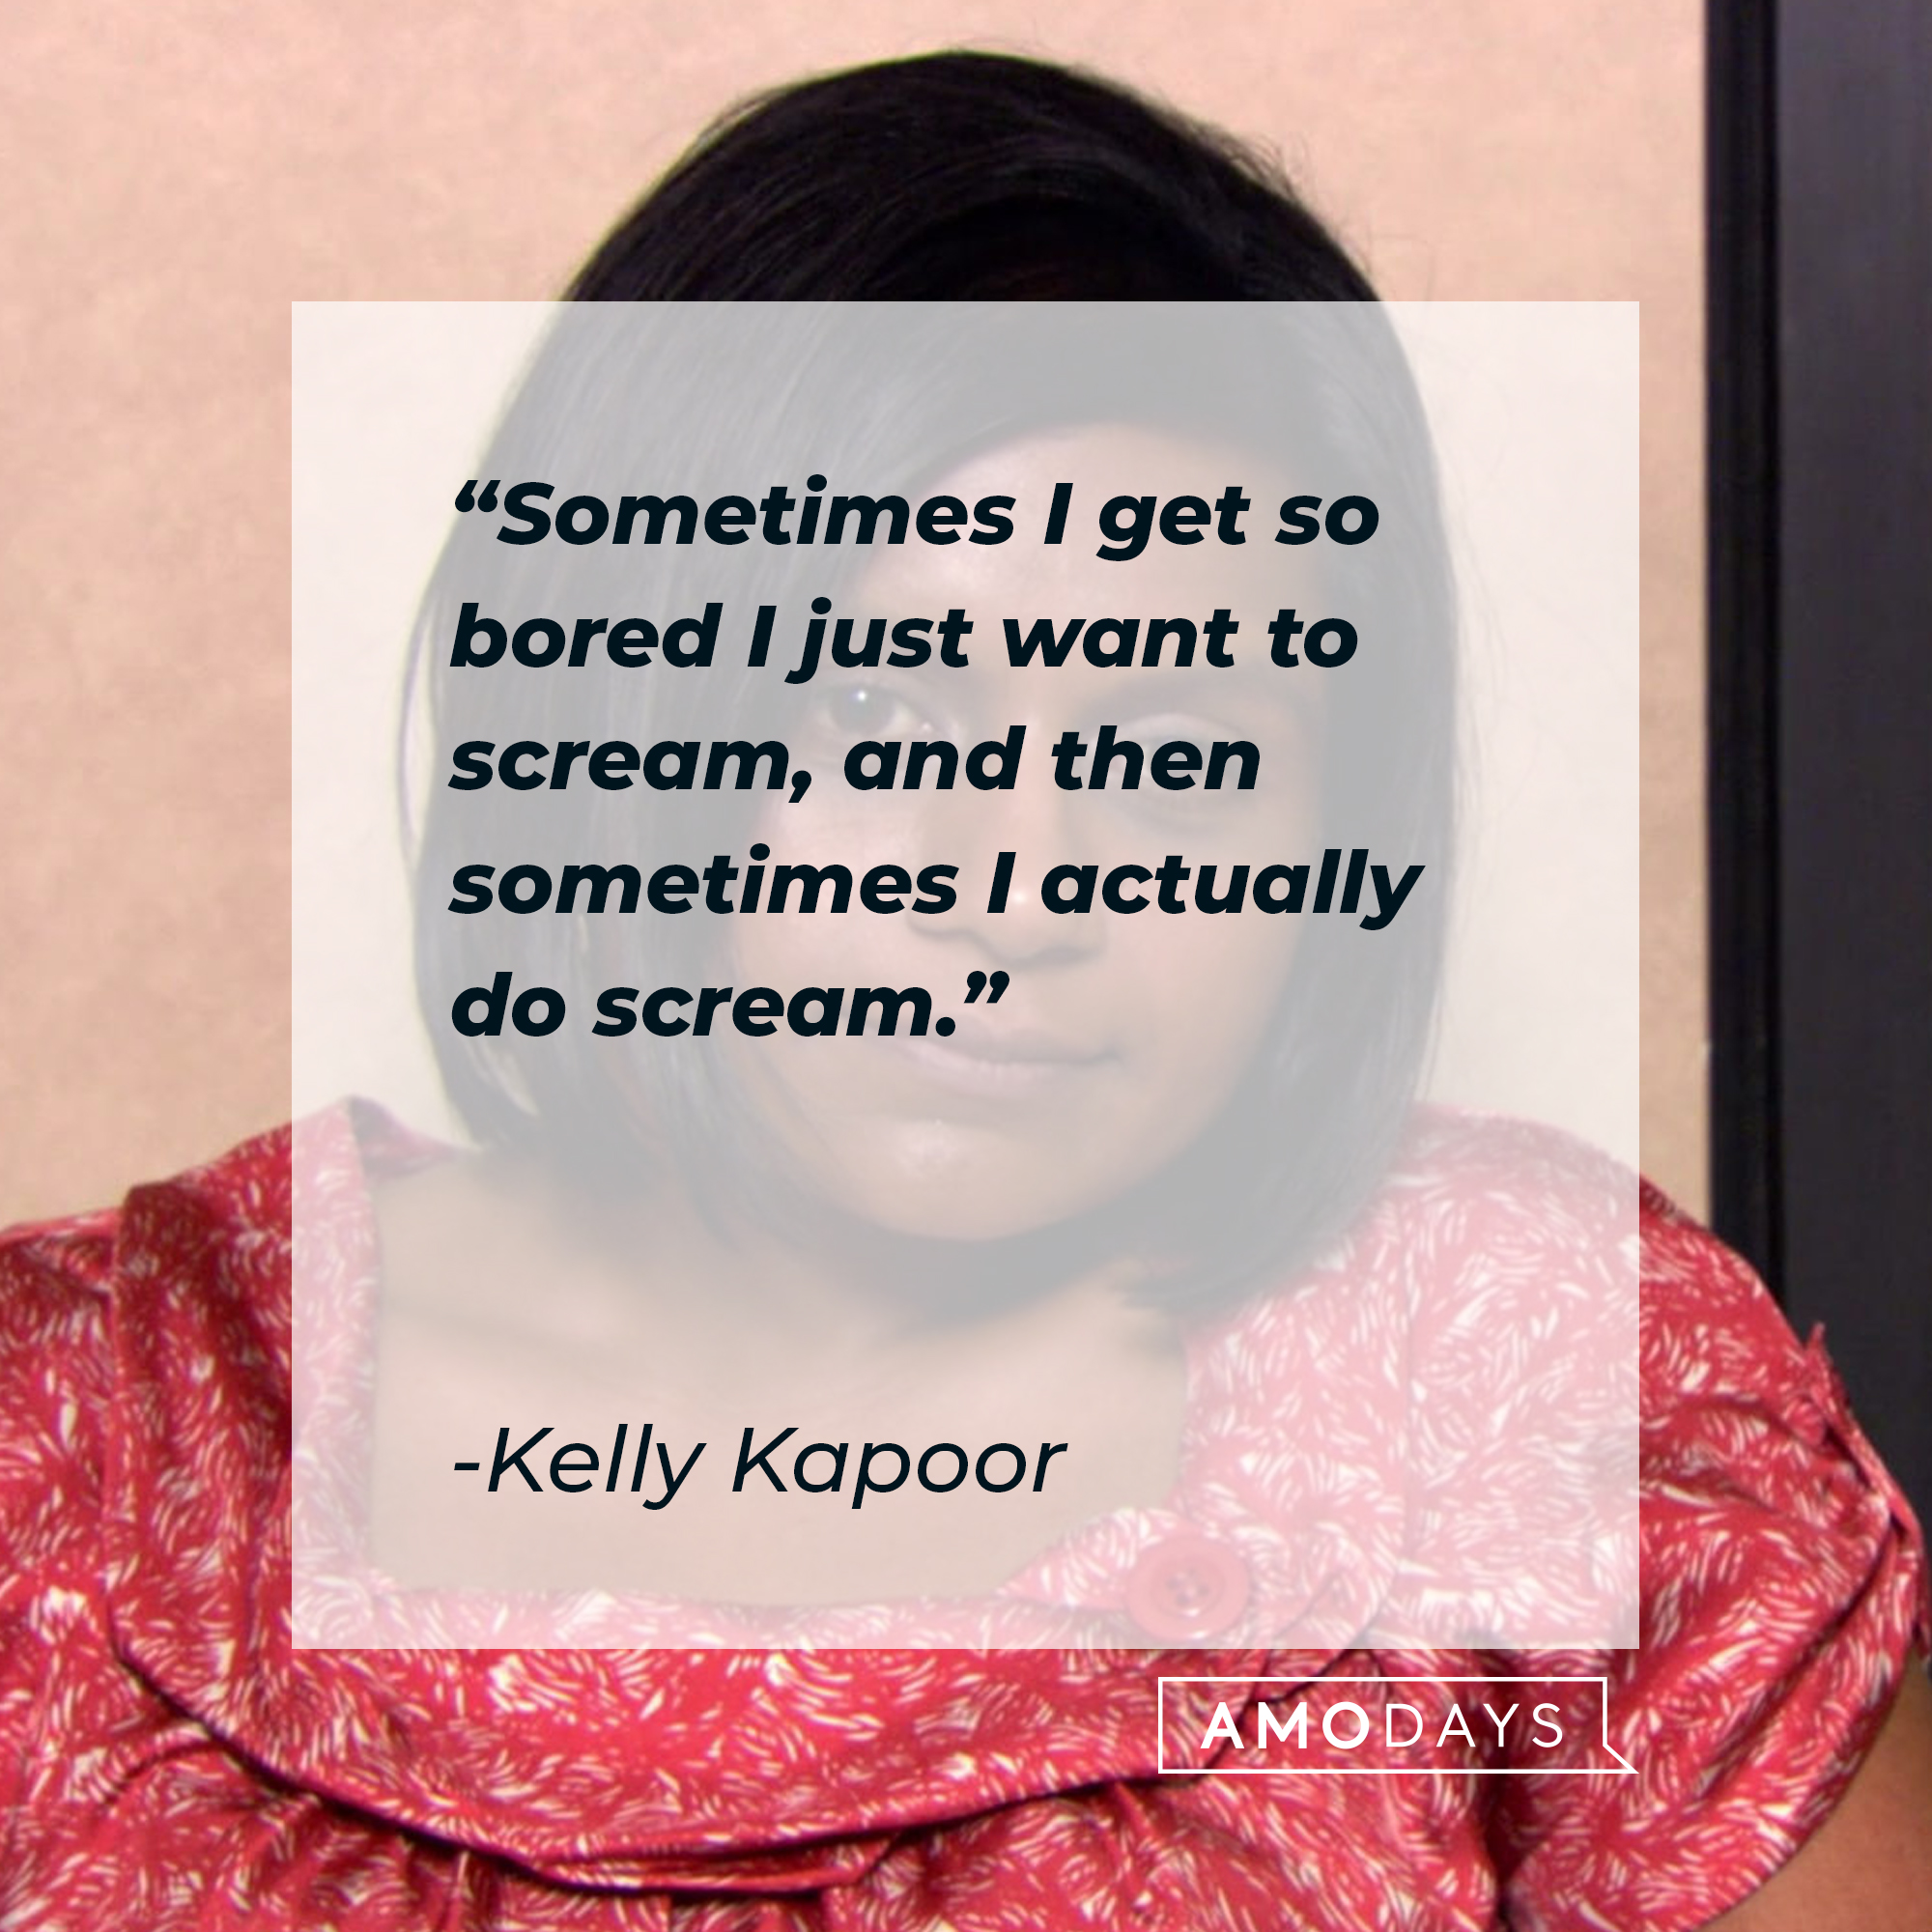 Kelly Kapoor's quote: "Sometimes I get so bored I just want to scream, and then sometimes I actually do scream." | Source: facebook.com/TheOfficeTV